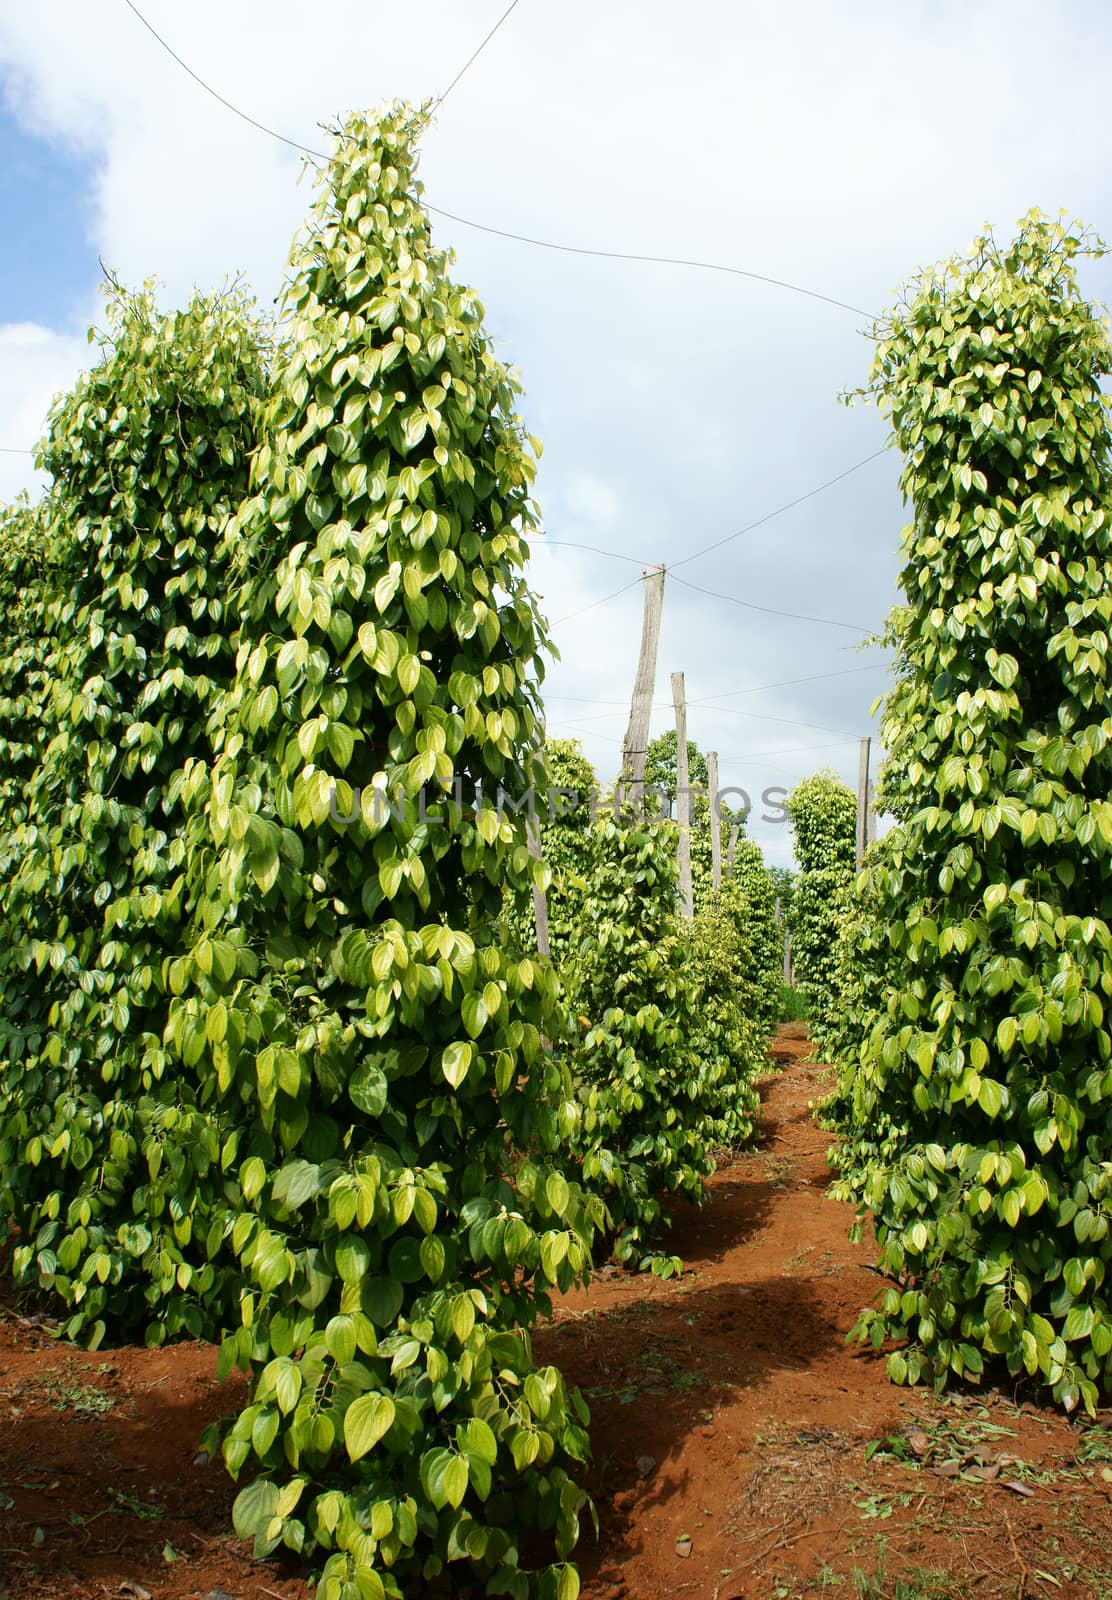 Pepper field at Gia Lai, Viet Nam, group of pepper plant in green, this farm product is export product from Vietnam to Asia, vegetable growing in bush, and plant in many aea as Binh Phuoc, Daklak